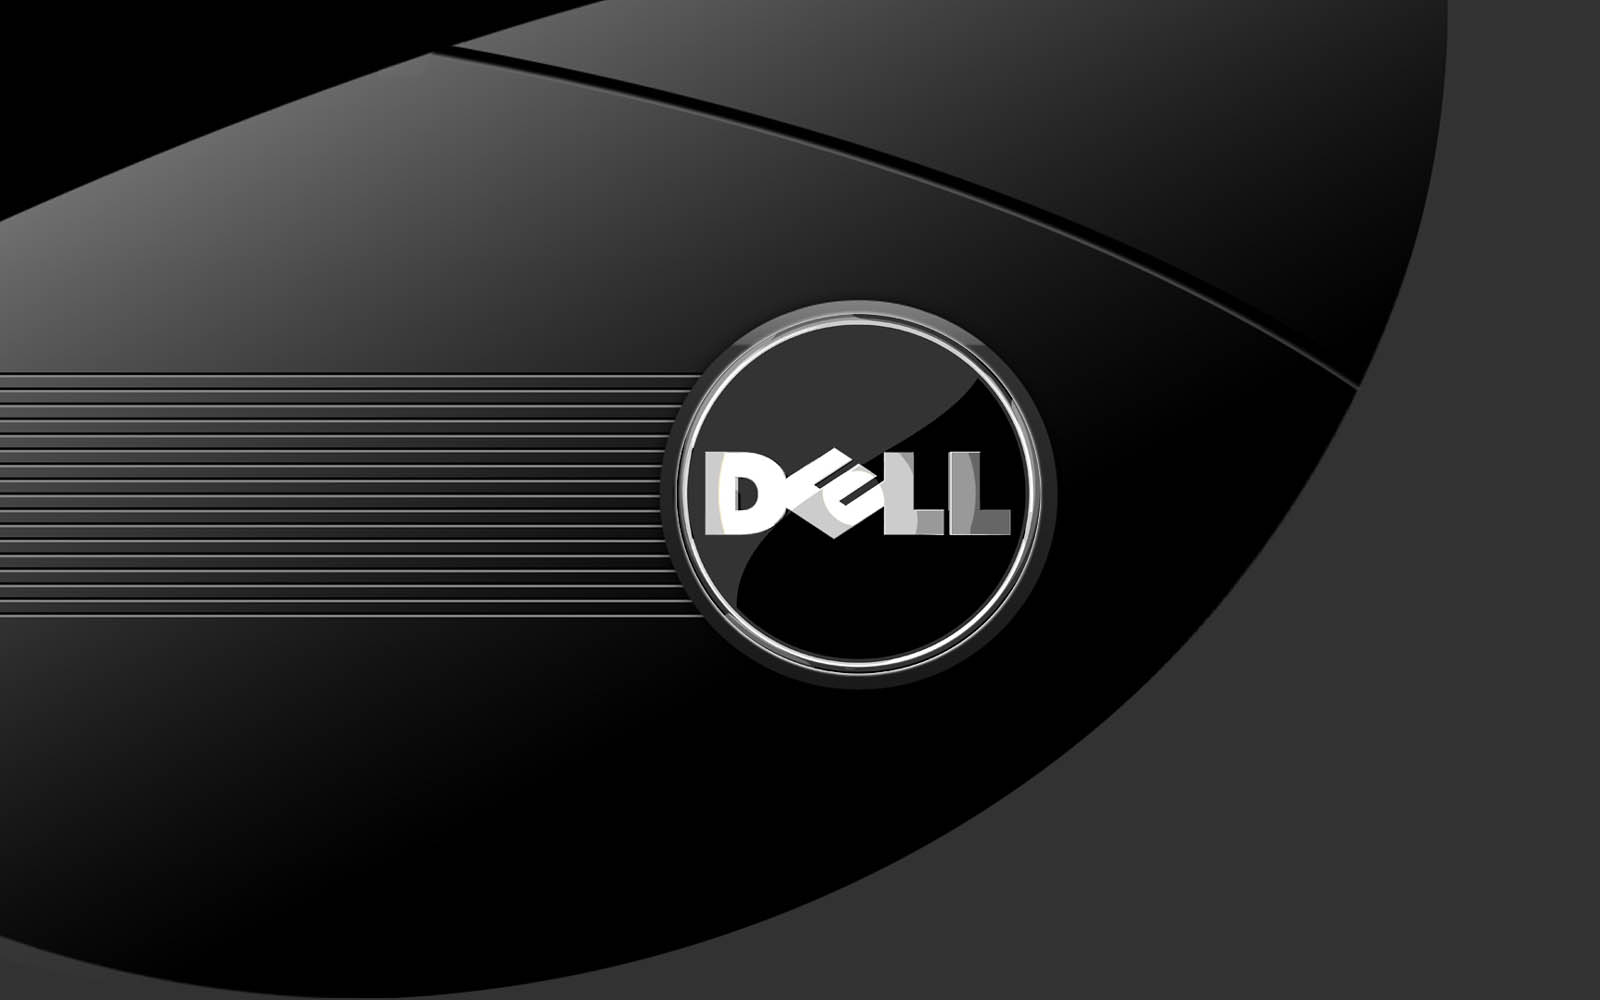 Dell Wallpaper Image Photos Pictures And Background For